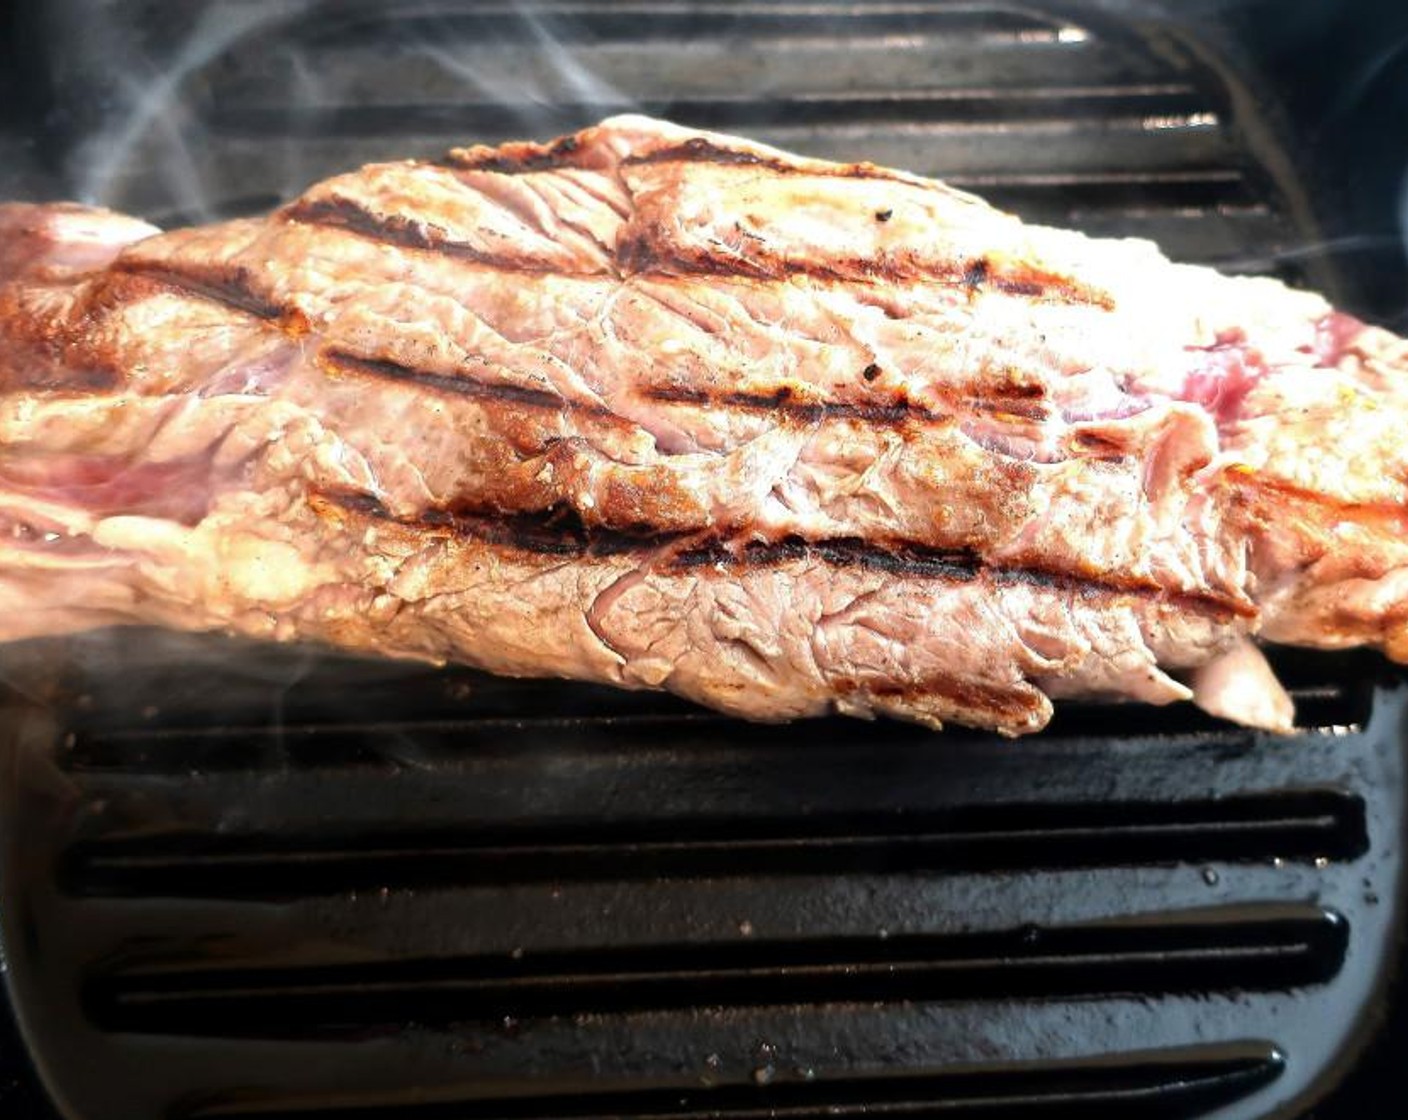 step 3 Season fillet with Kosher Salt (to taste), Cayenne Pepper (to taste), and Granulated Garlic (to taste). Sear on a very hot grill on all sides.